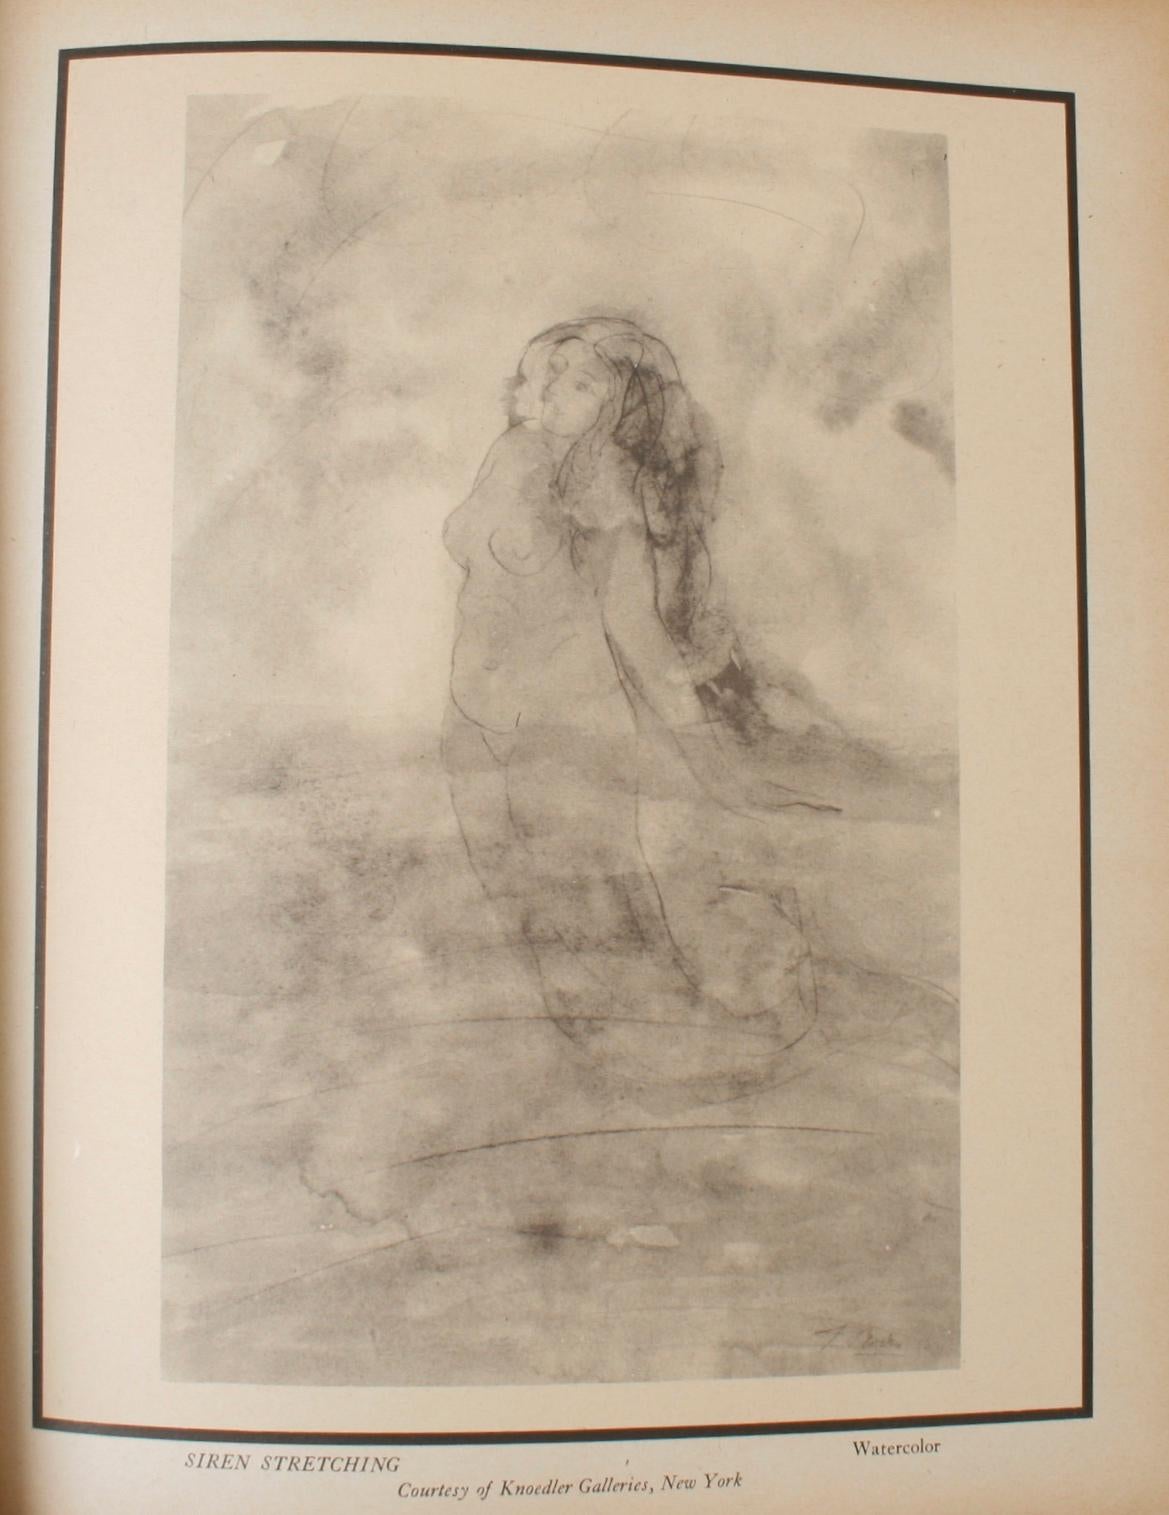 Paper Auguste Rodin by Philip R Adams, First Edition